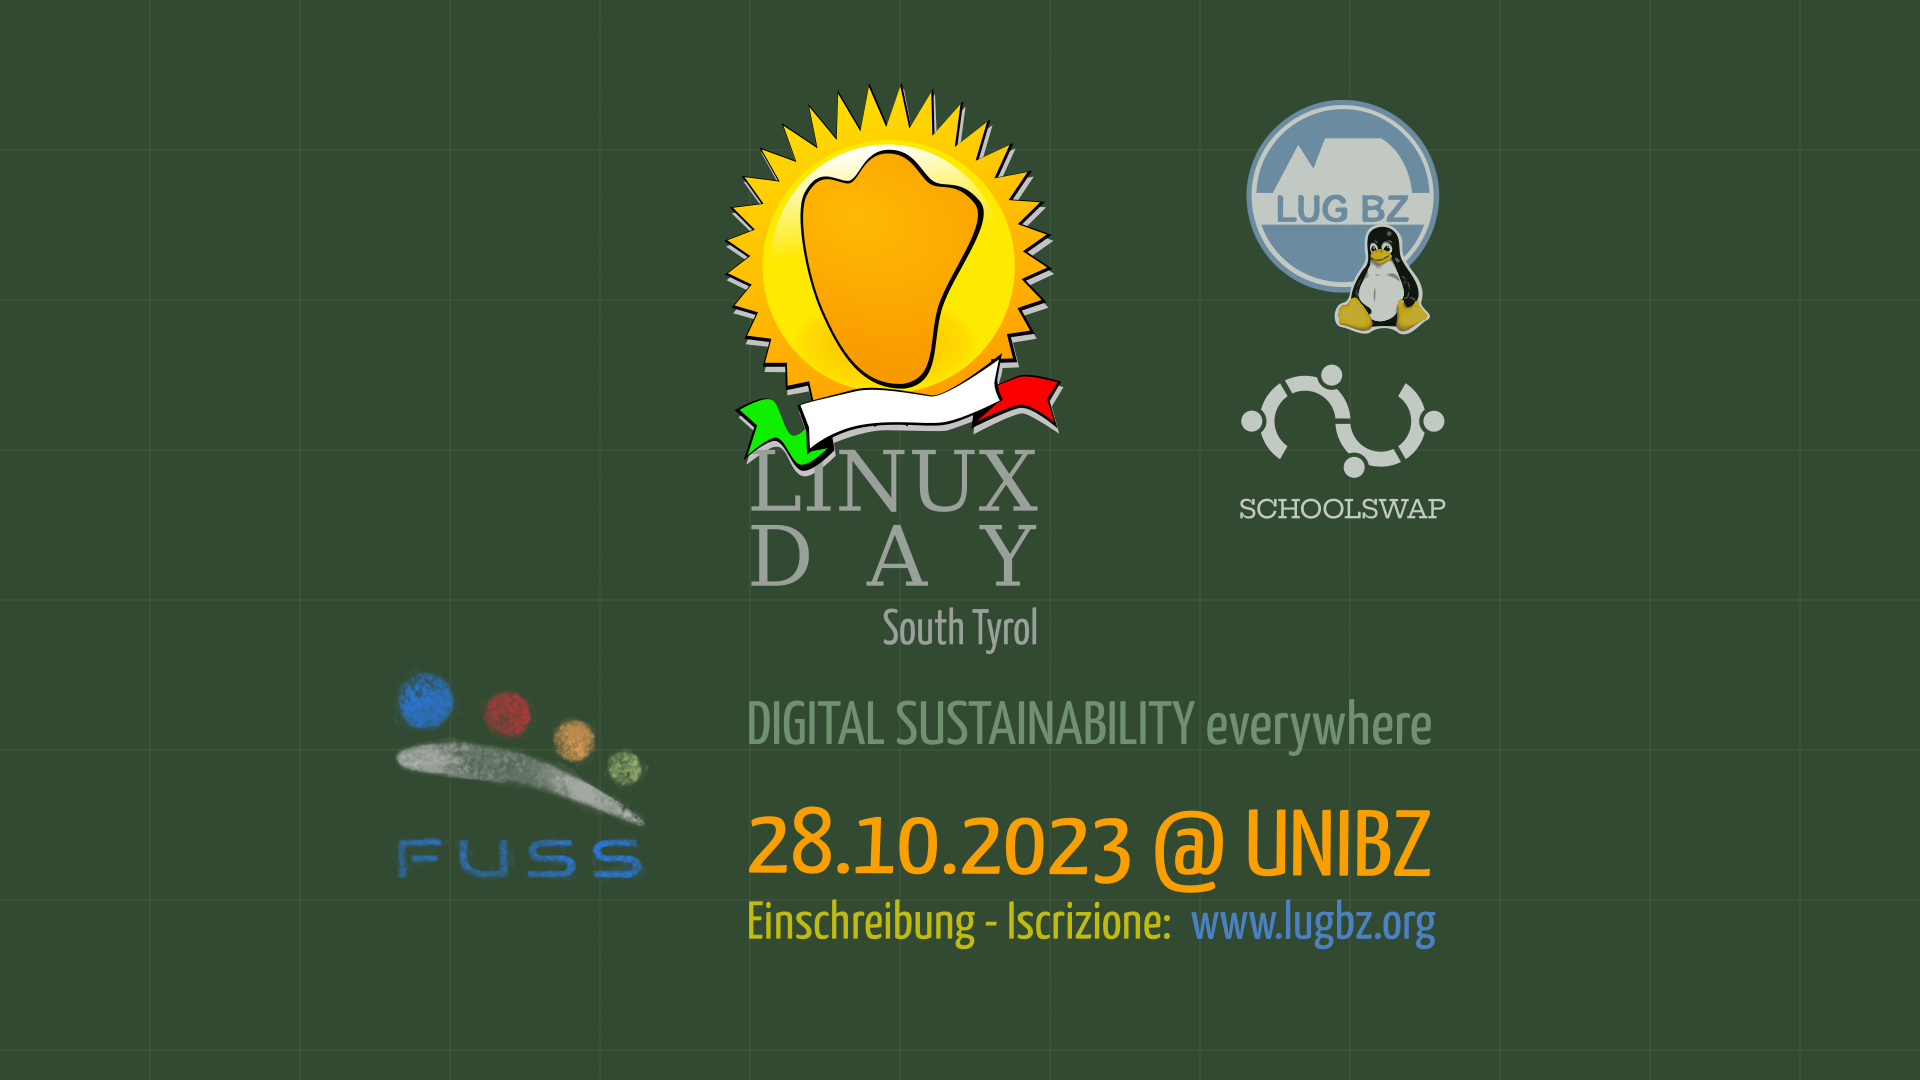 Linux Day 2023 - South Tyrol